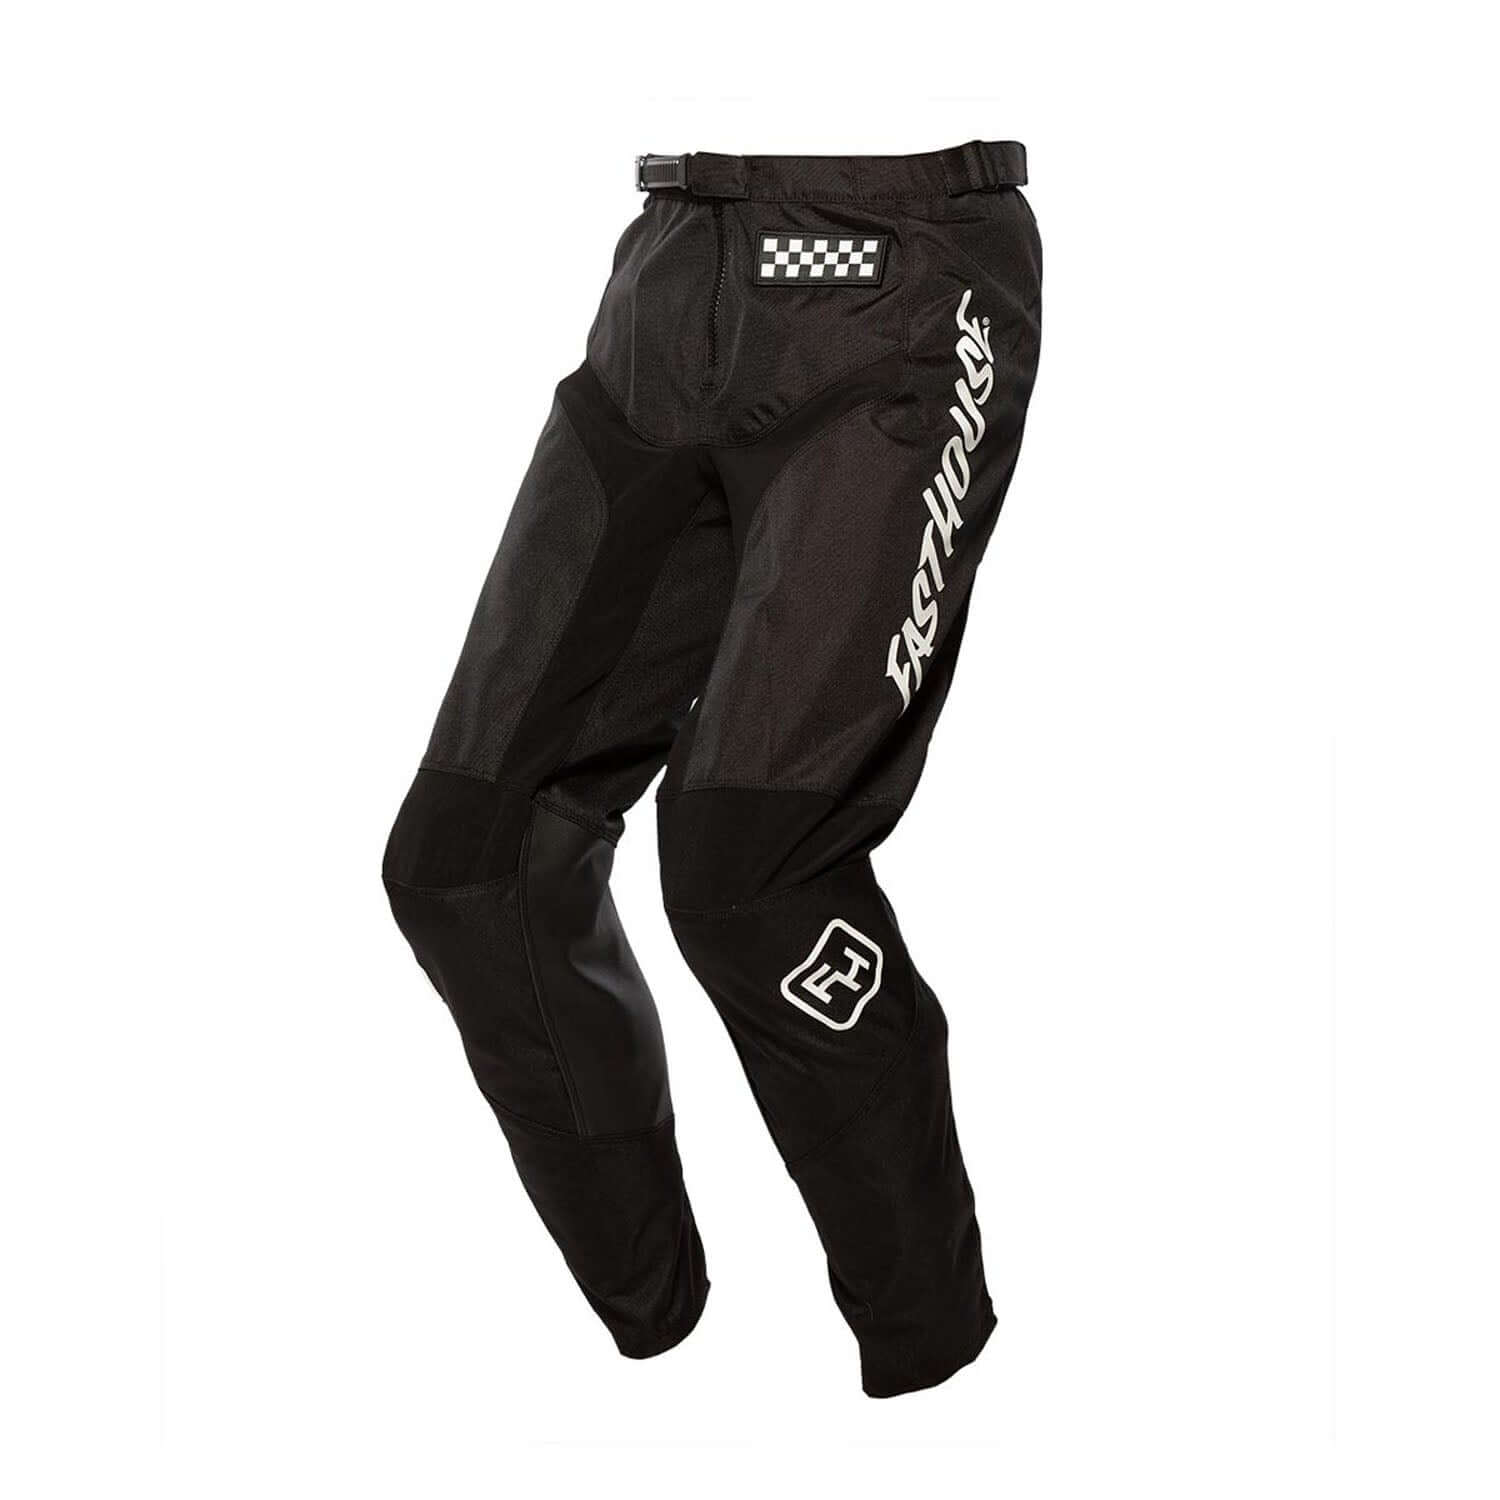 Fasthouse Carbon Youth Pant Black Bike Pants